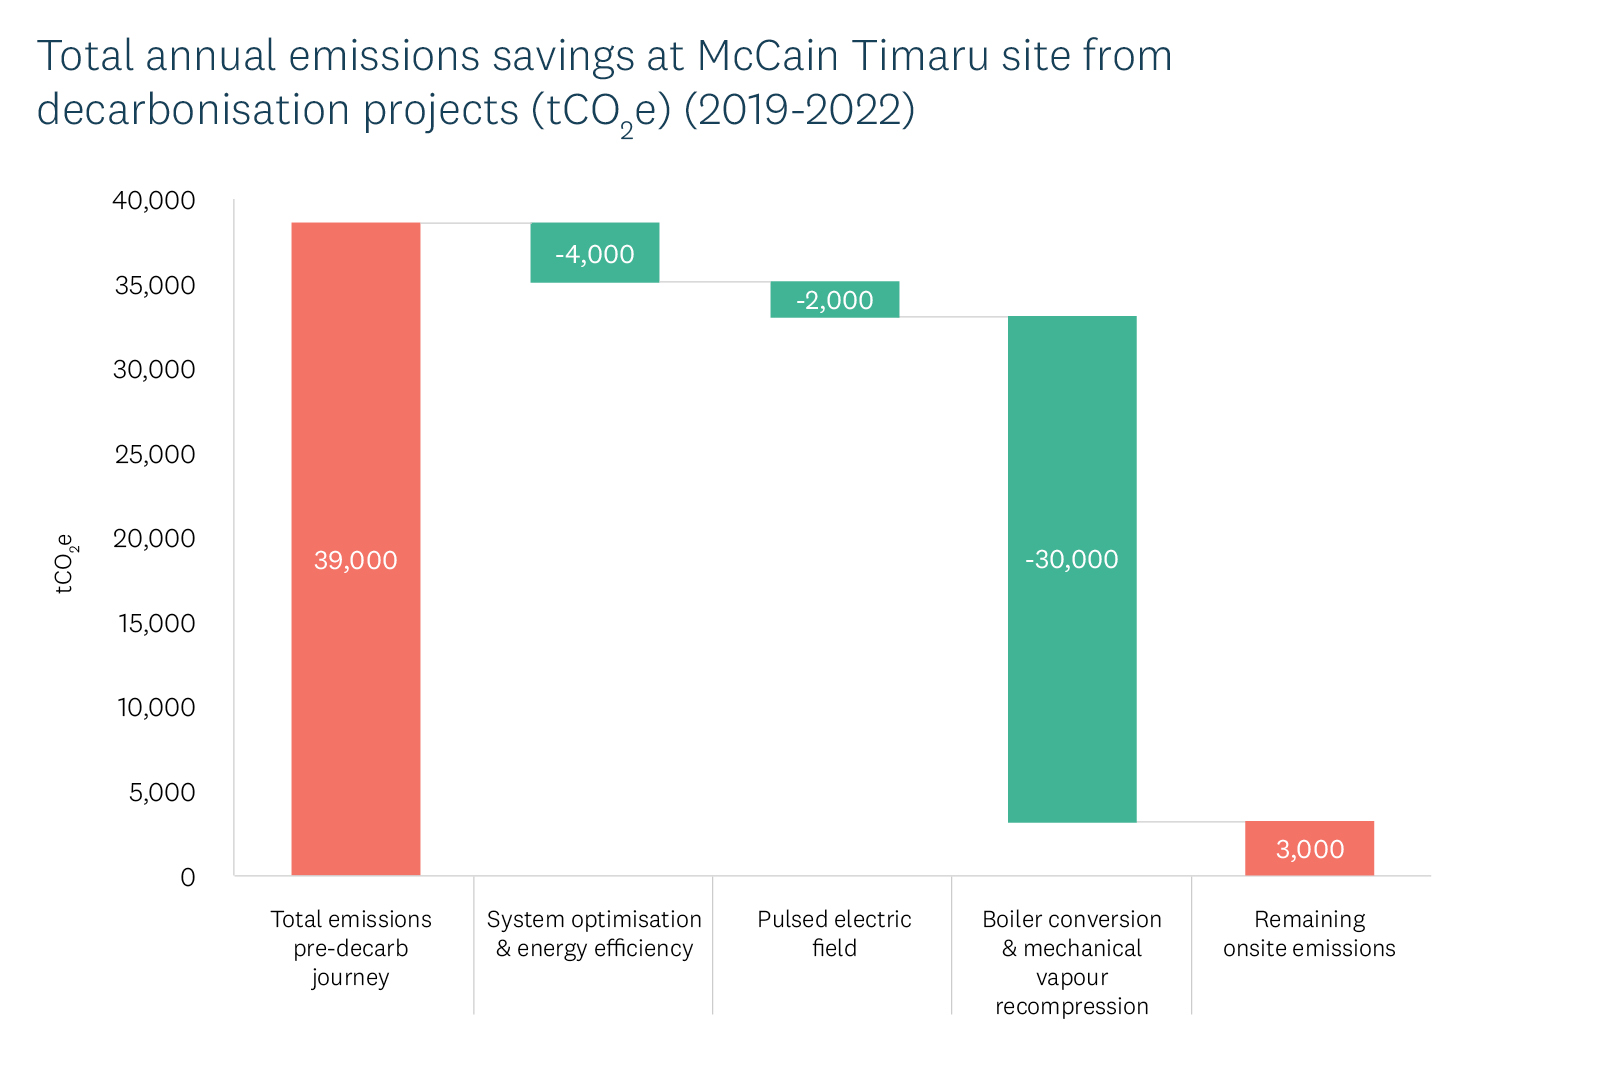 Total annual emissions savings at McCain Timaru site from decarbonisation projects. 